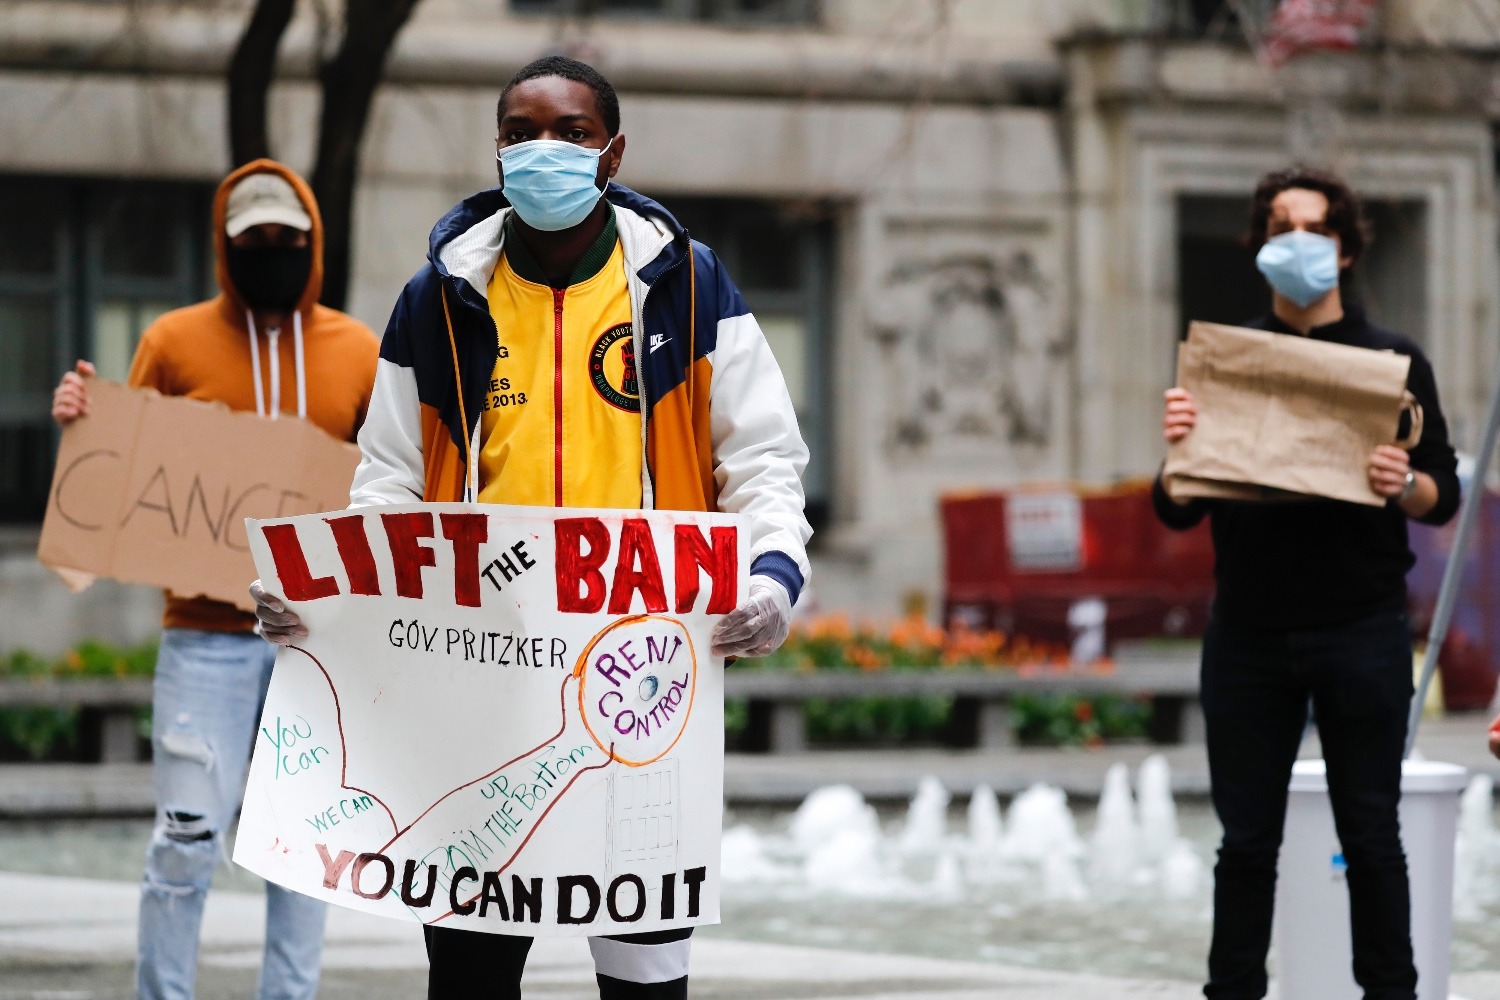 Members of the Lift the Ban Coalition gather at Daley Plaza in Chicago on Thursday, April 30, 2020